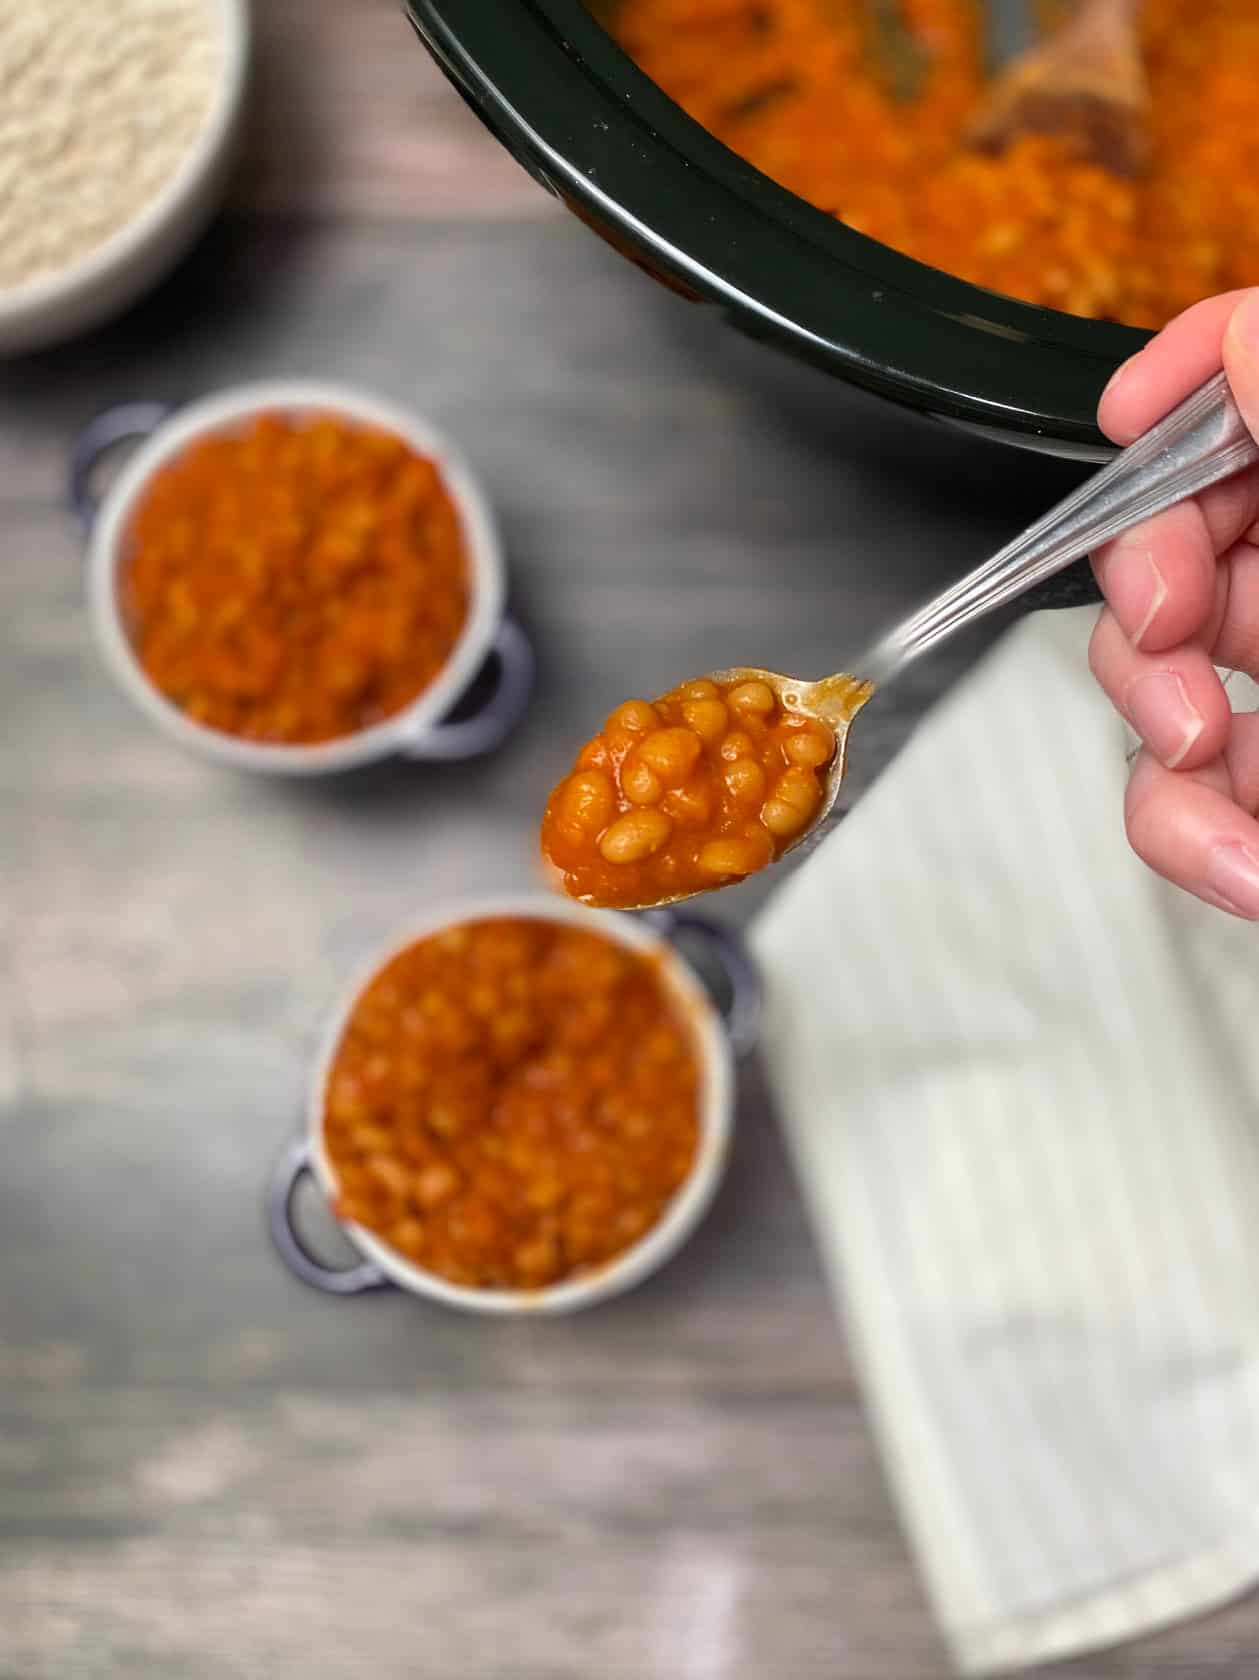 spoon picking up a bite of baked beans from a purple bowl